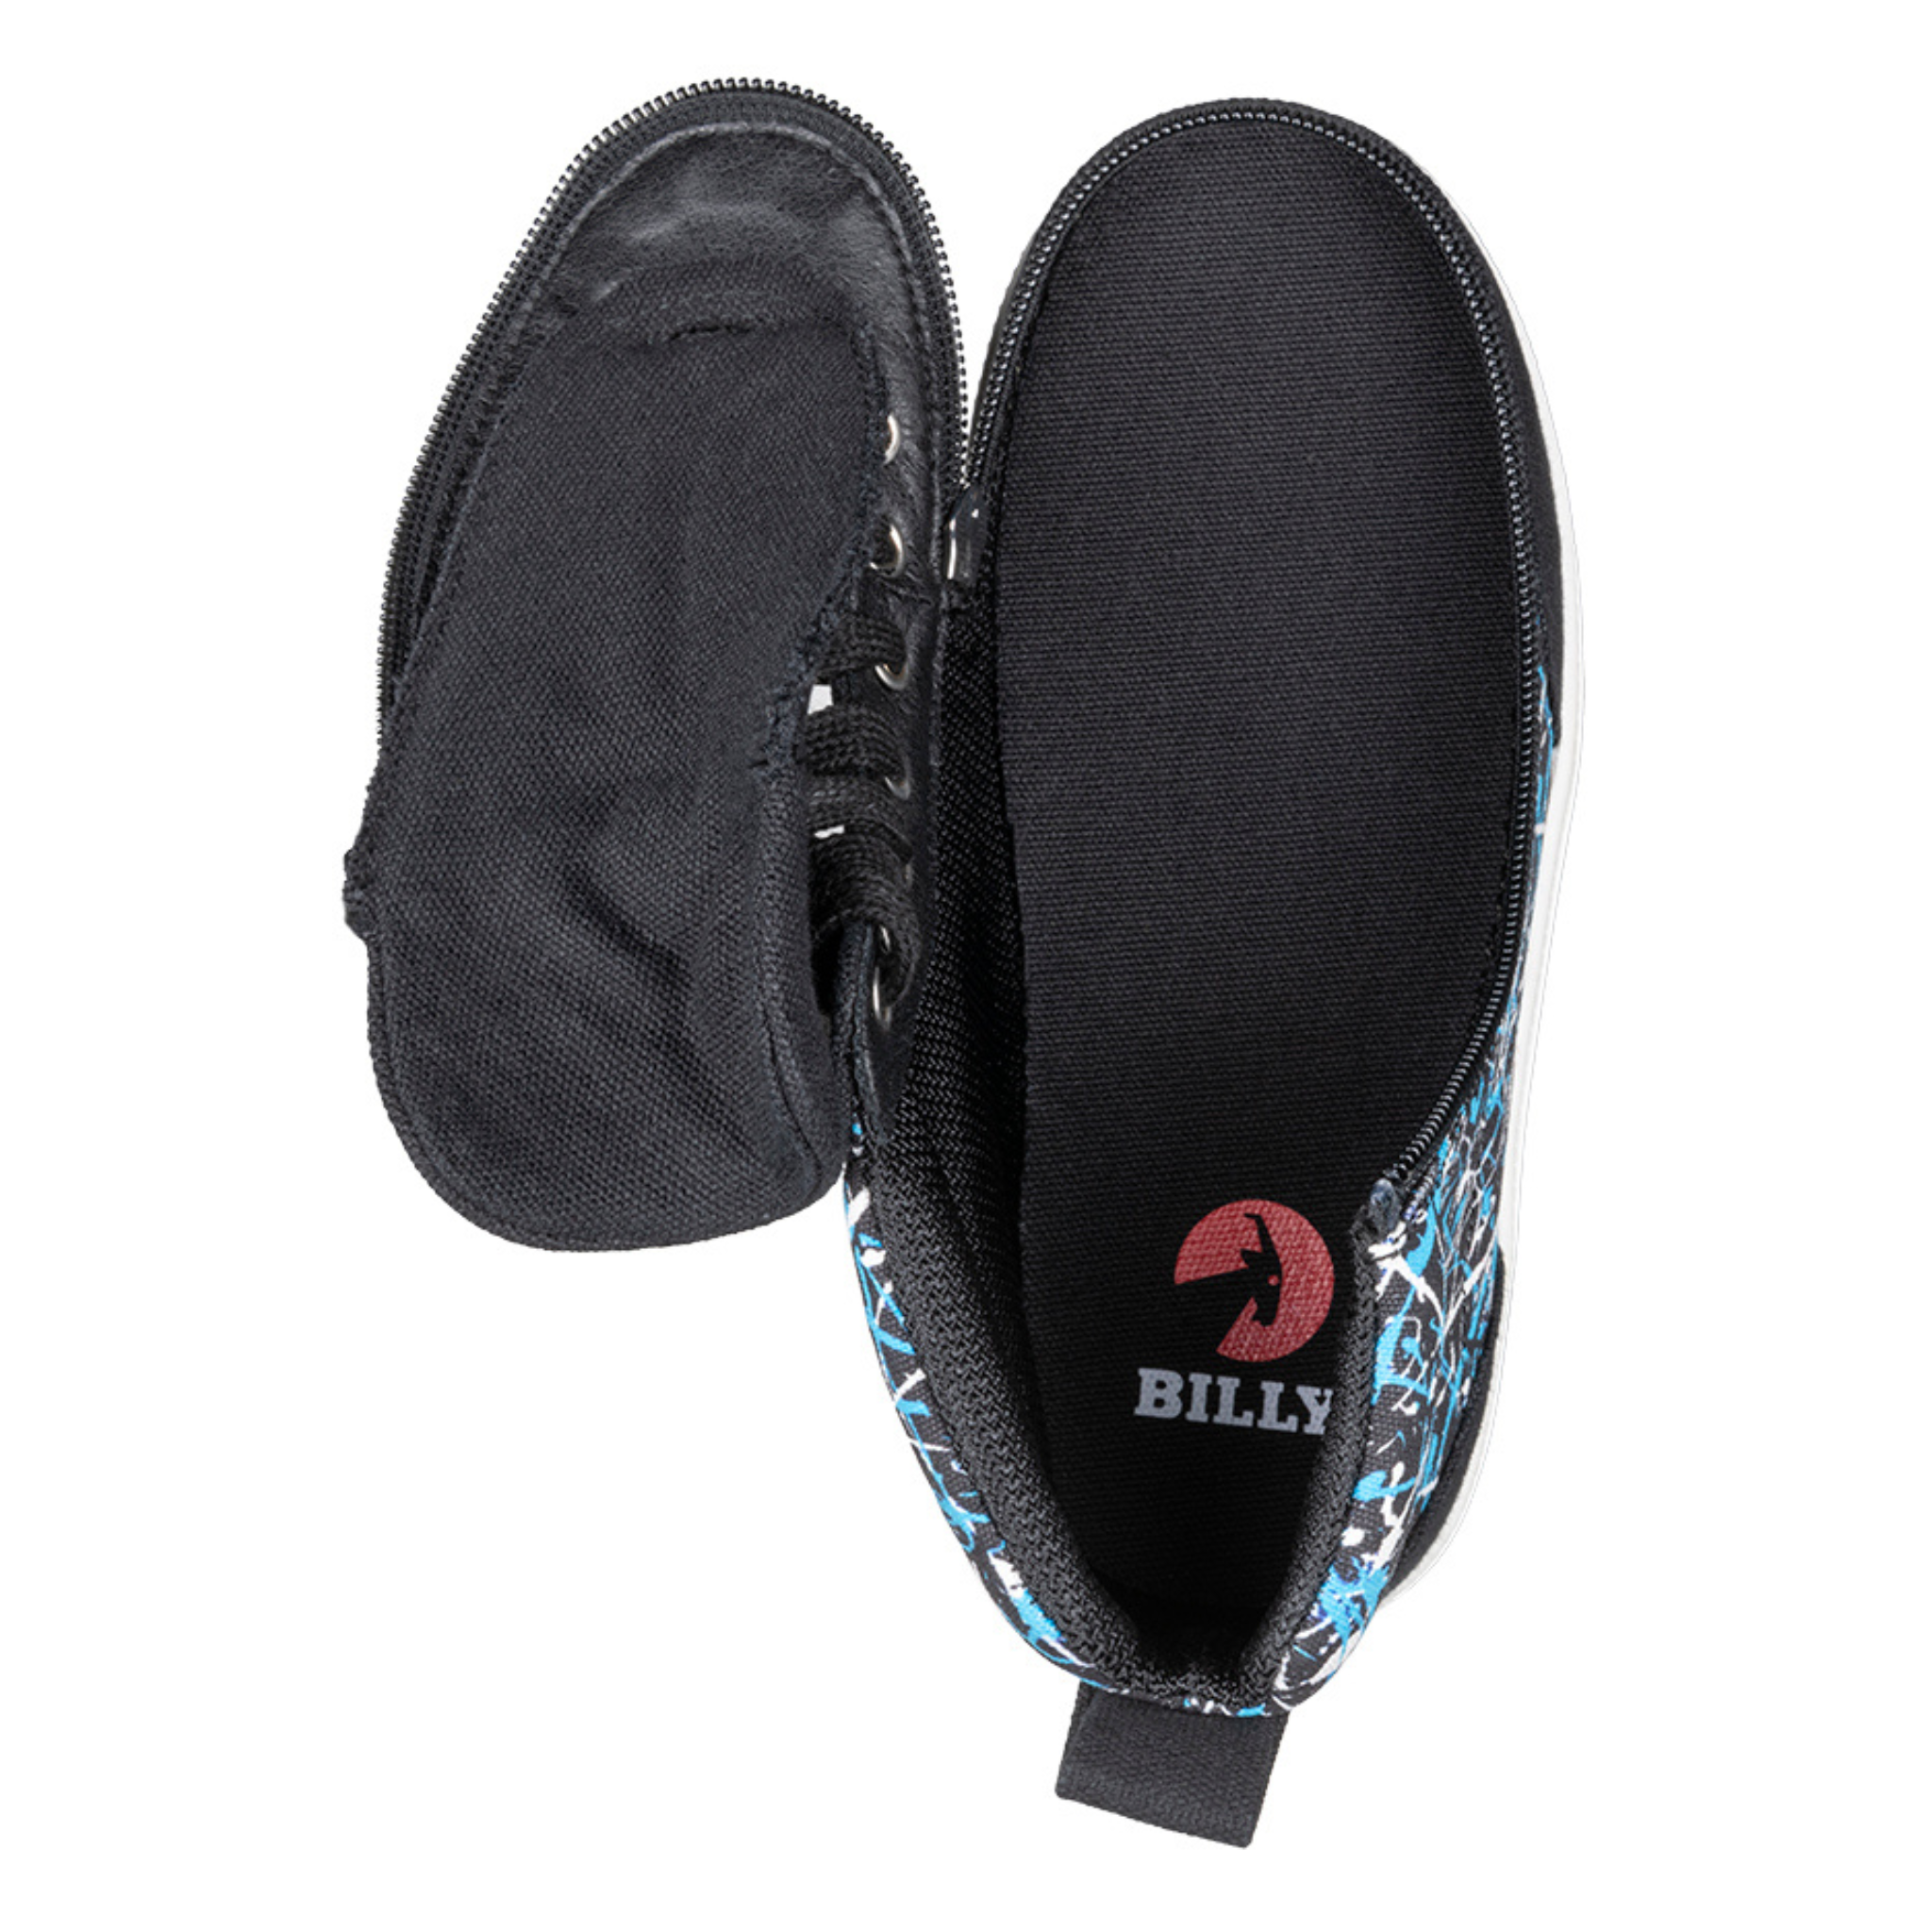 Billy Footwear (Toddlers) - High Top D|R Black Graffiti Canvas Shoes